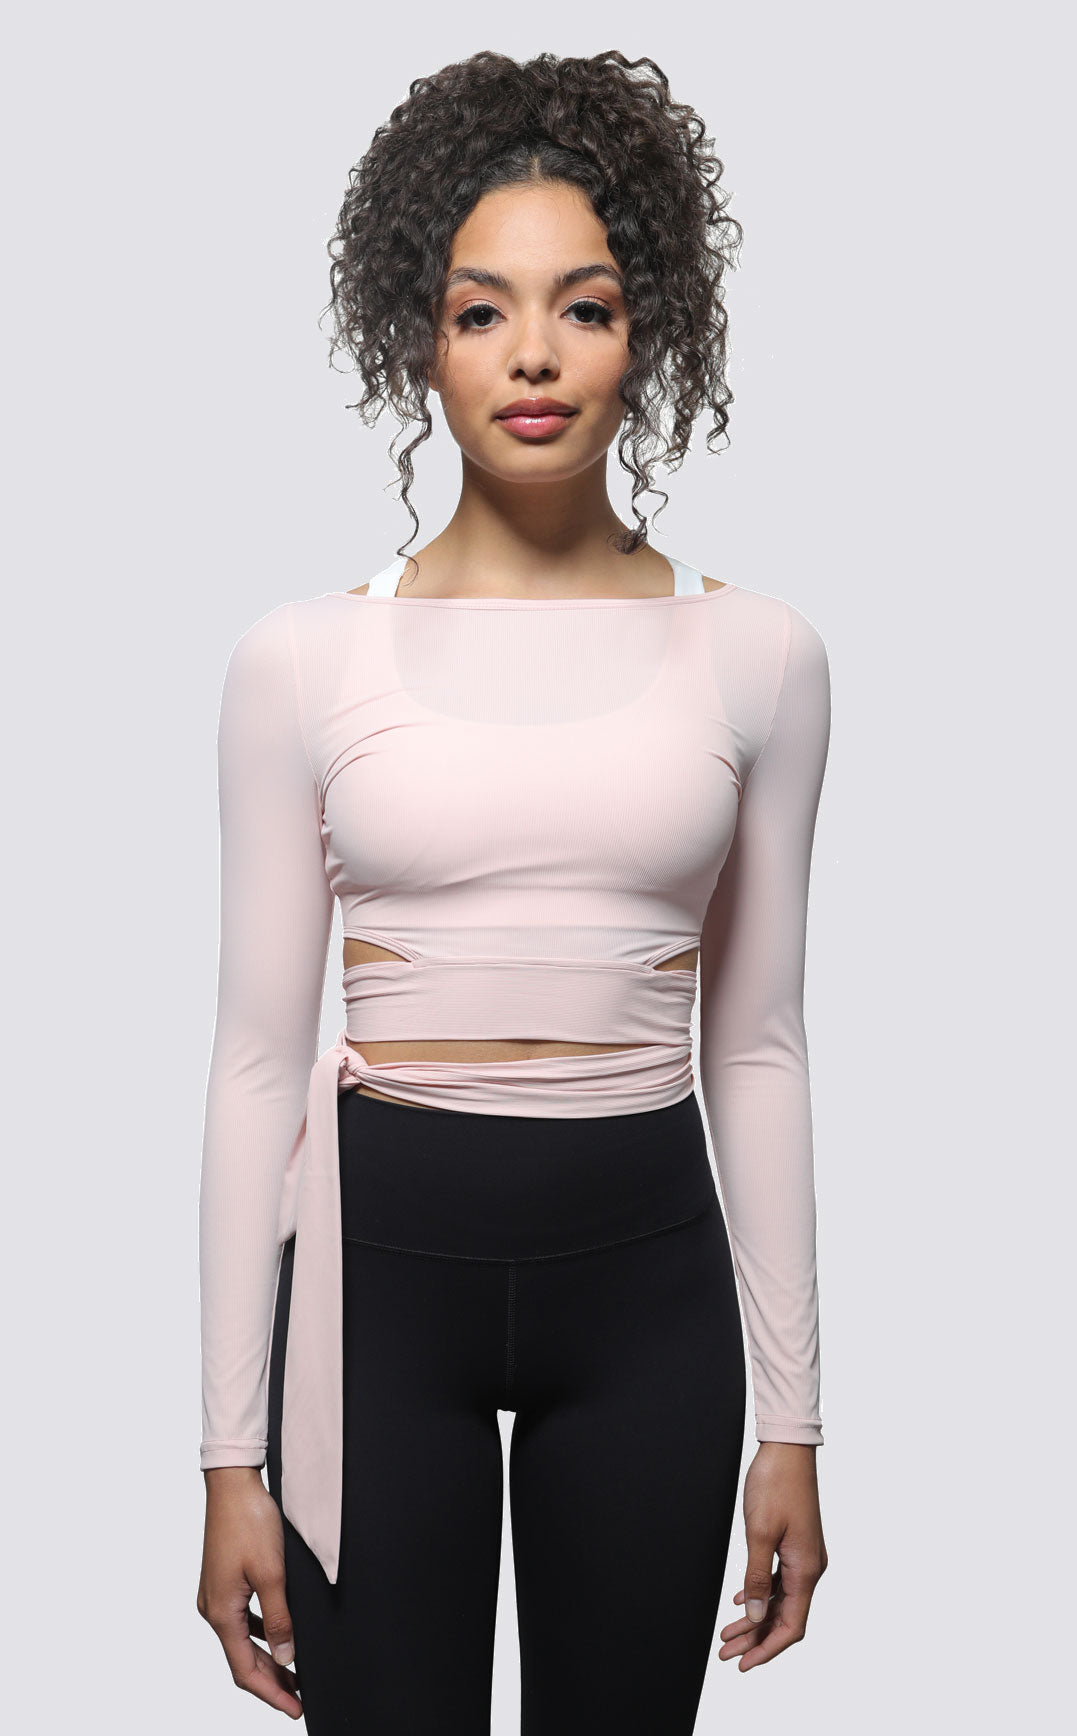 https://cdn.shopify.com/s/files/1/0931/6618/products/Wrap-Top-Pink-Ballet-Front.jpg?v=1622691856